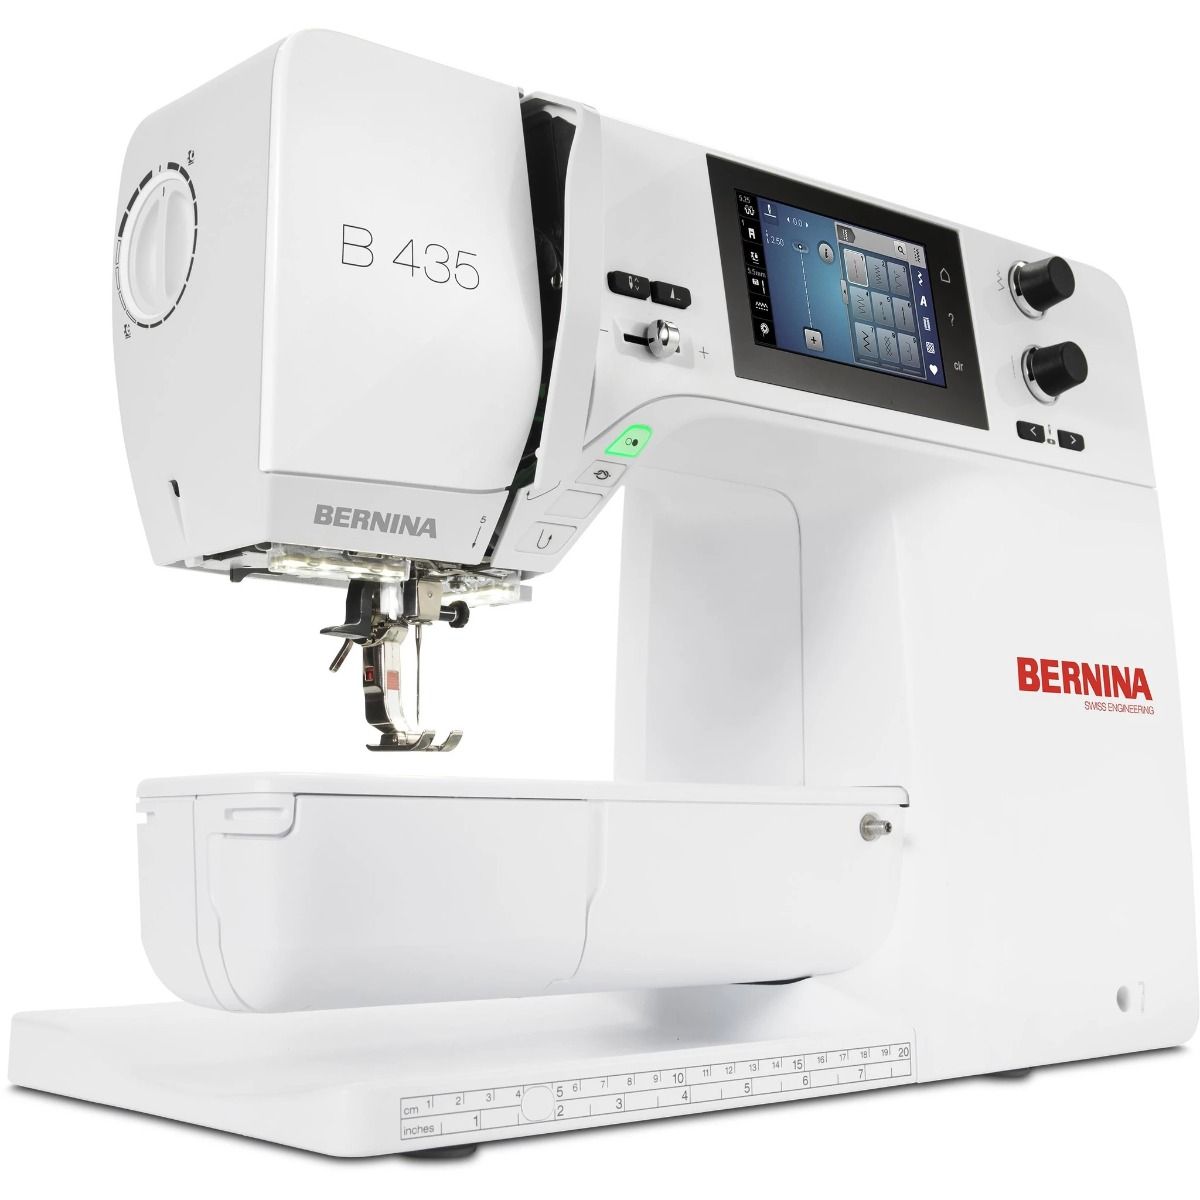 Bernina 435 Sewing and Quilting Machine Front,Bernina 435 Sewing and Quilting Machine Angled,Bernina 435 Sewing and Quilting Machine Angled,Bernina 435 Sewing and Quilting Machine with Project,Bernina 435 Sewing and Quilting Machine with Project